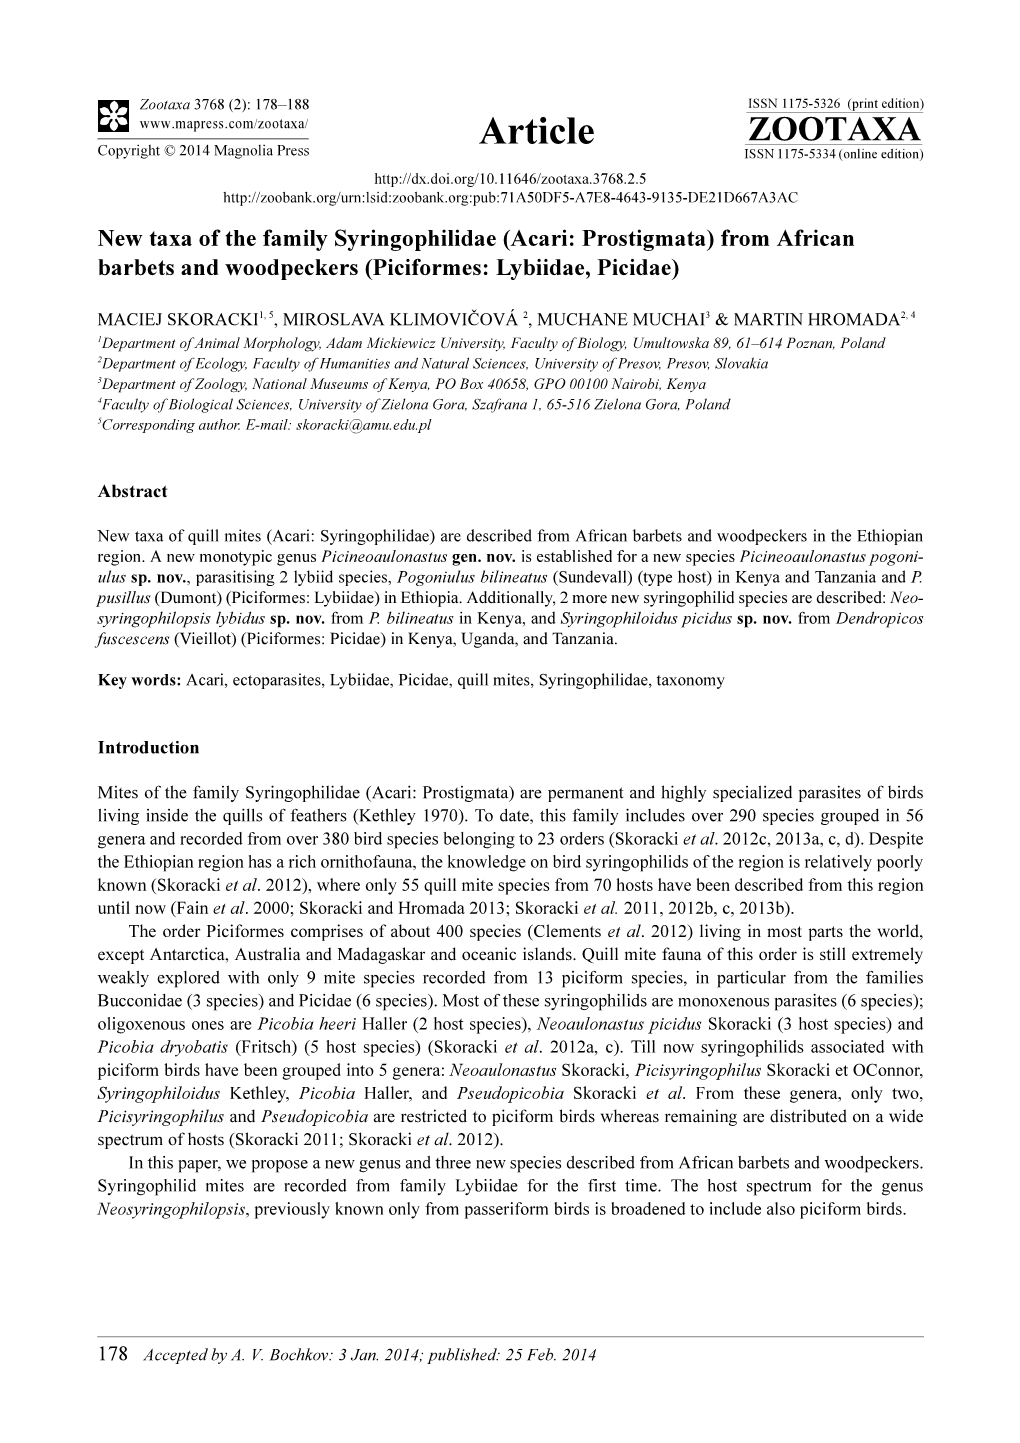 New Taxa of the Family Syringophilidae (Acari: Prostigmata) from African Barbets and Woodpeckers (Piciformes: Lybiidae, Picidae)